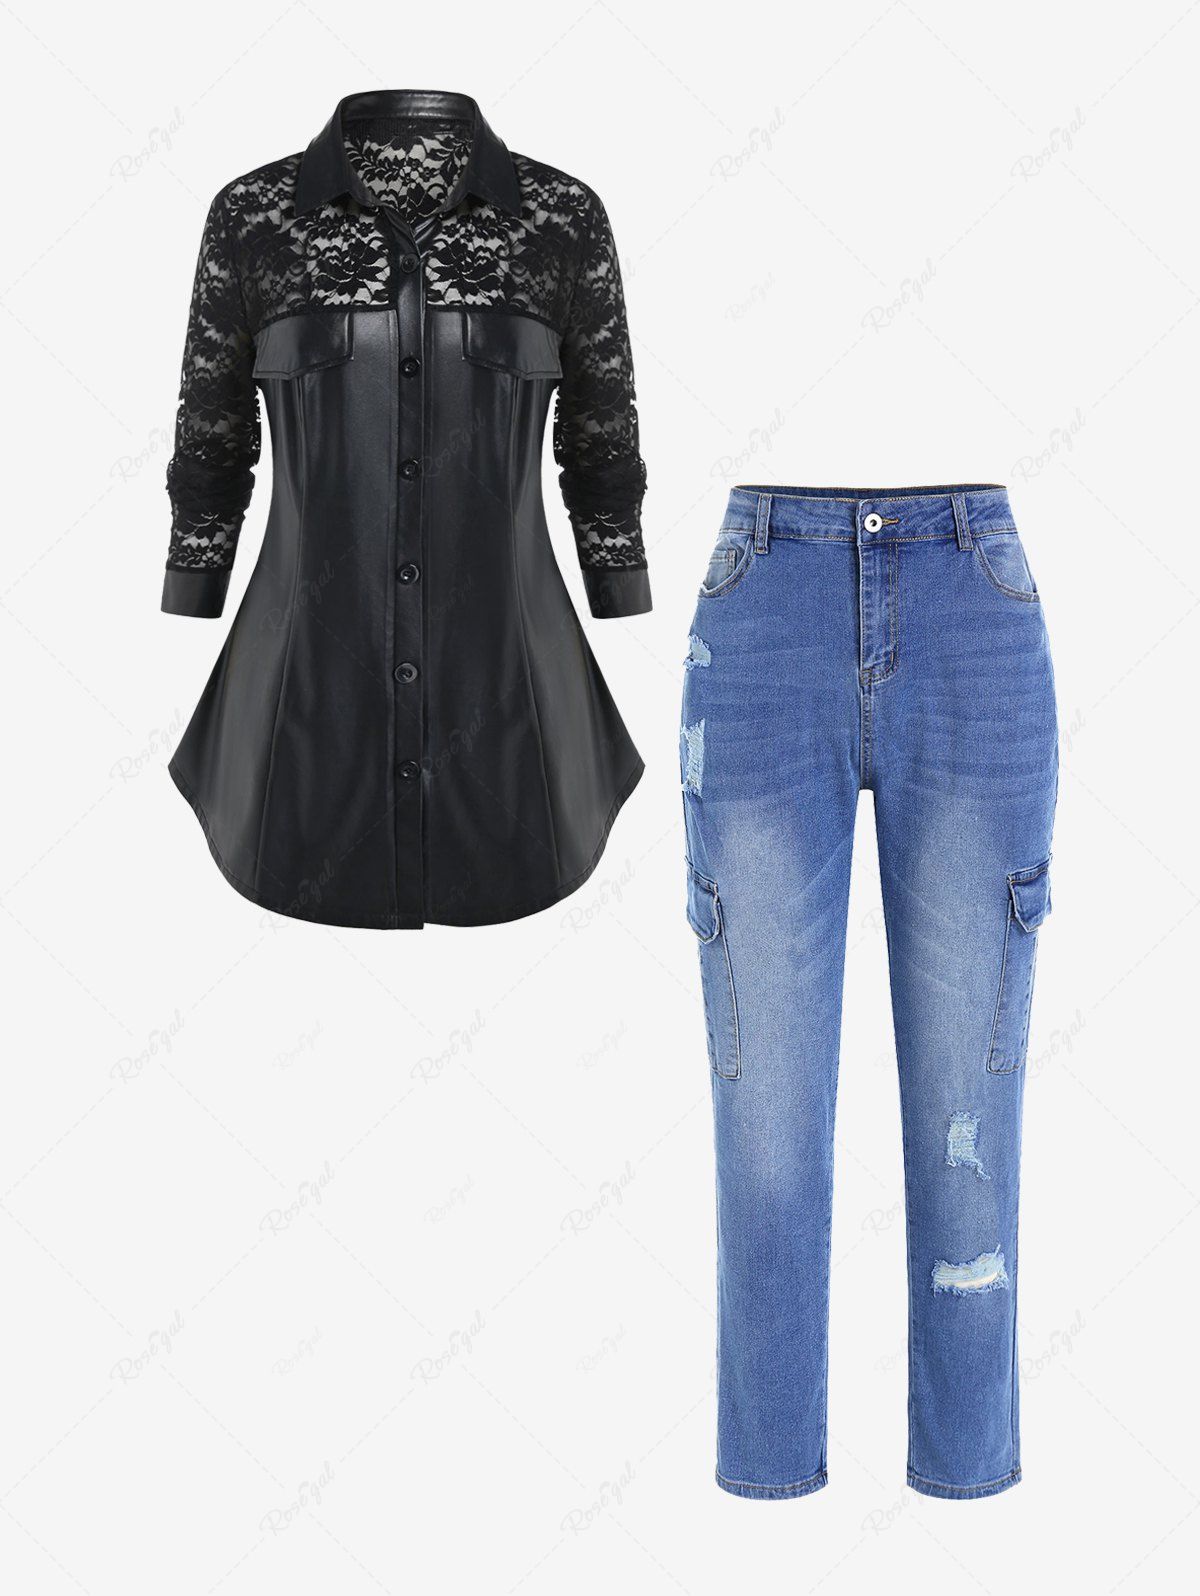 Unique Plus Size Long Sleeves Faux Leather Shirt with Lace and Pockets Ripped Jeans  